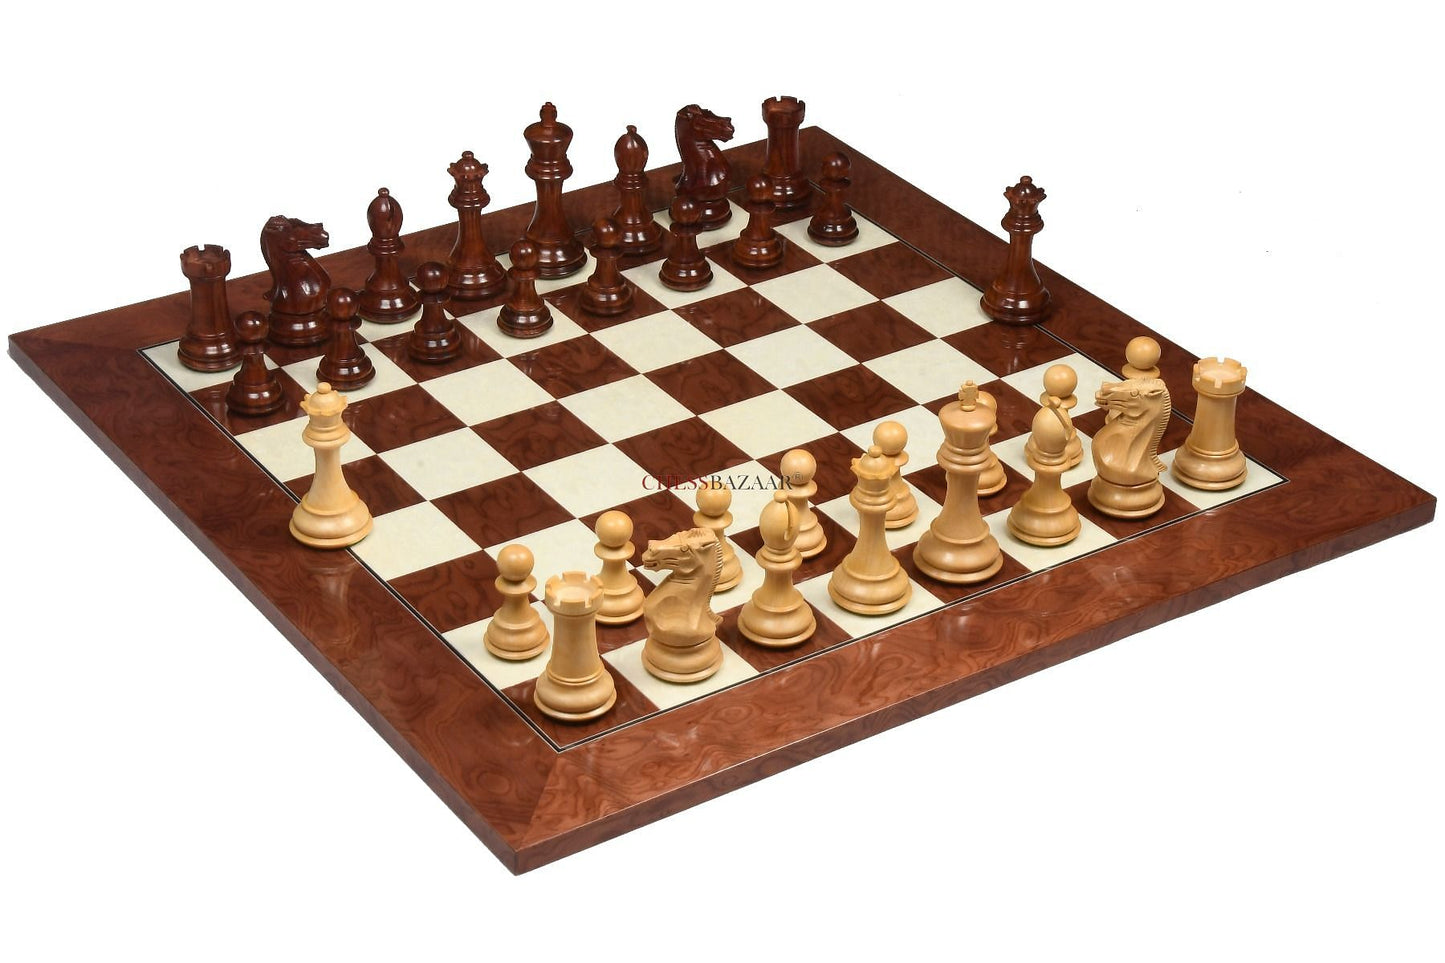 The Honour of Staunton (HOS) Series Weighted Chess Pieces in Bud Rose Wood & Box Wood - 4.0" King